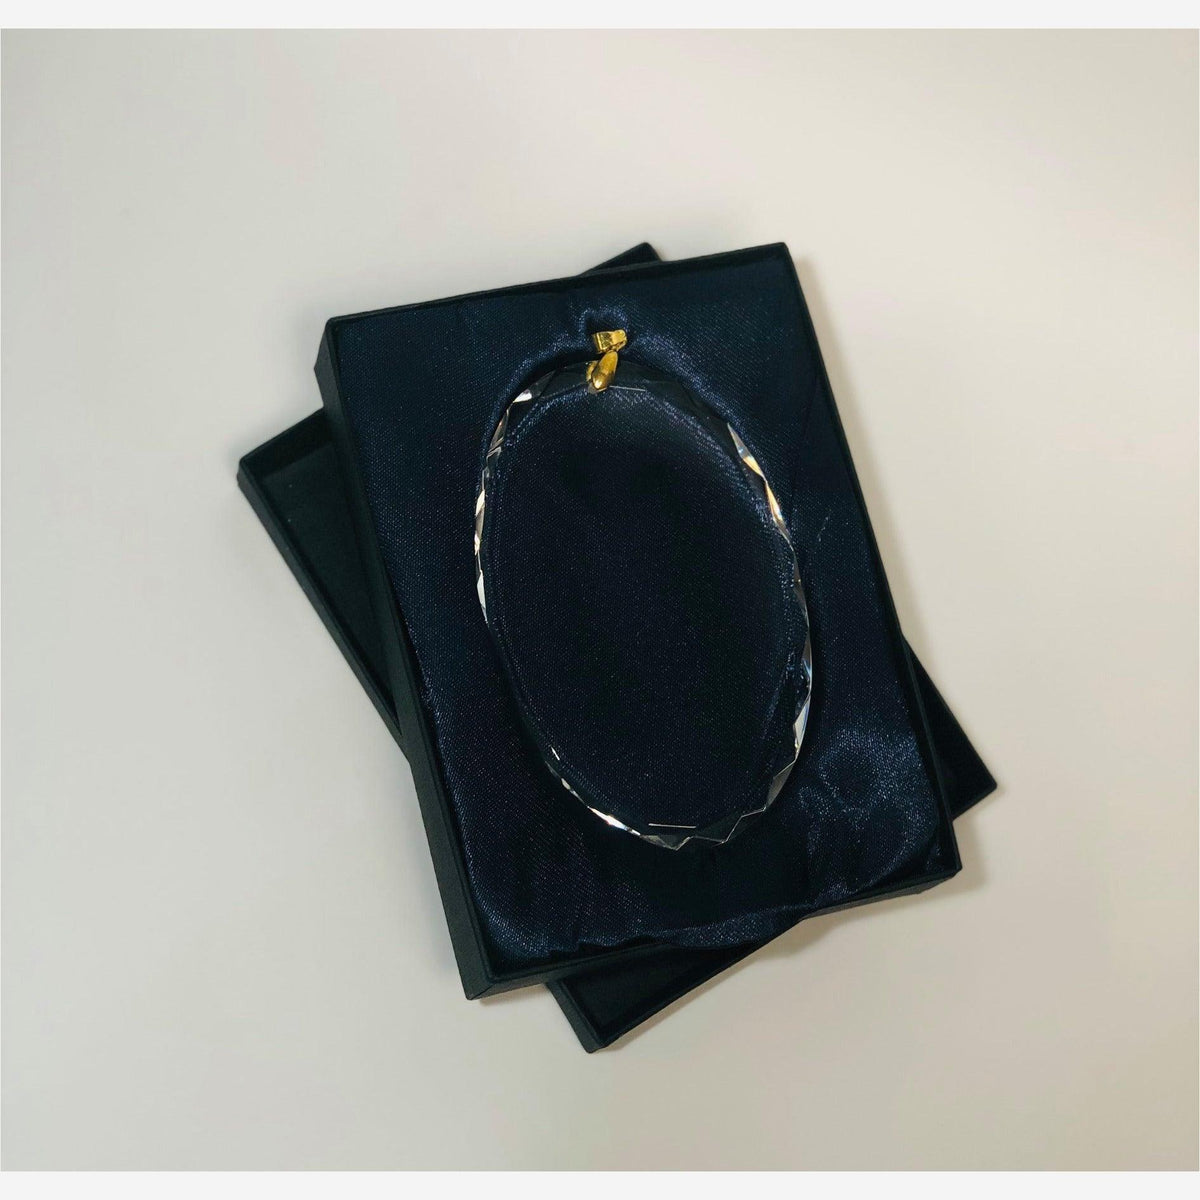 4 inch oval crystal ornament in a black box with navy satin gold clasp hanger